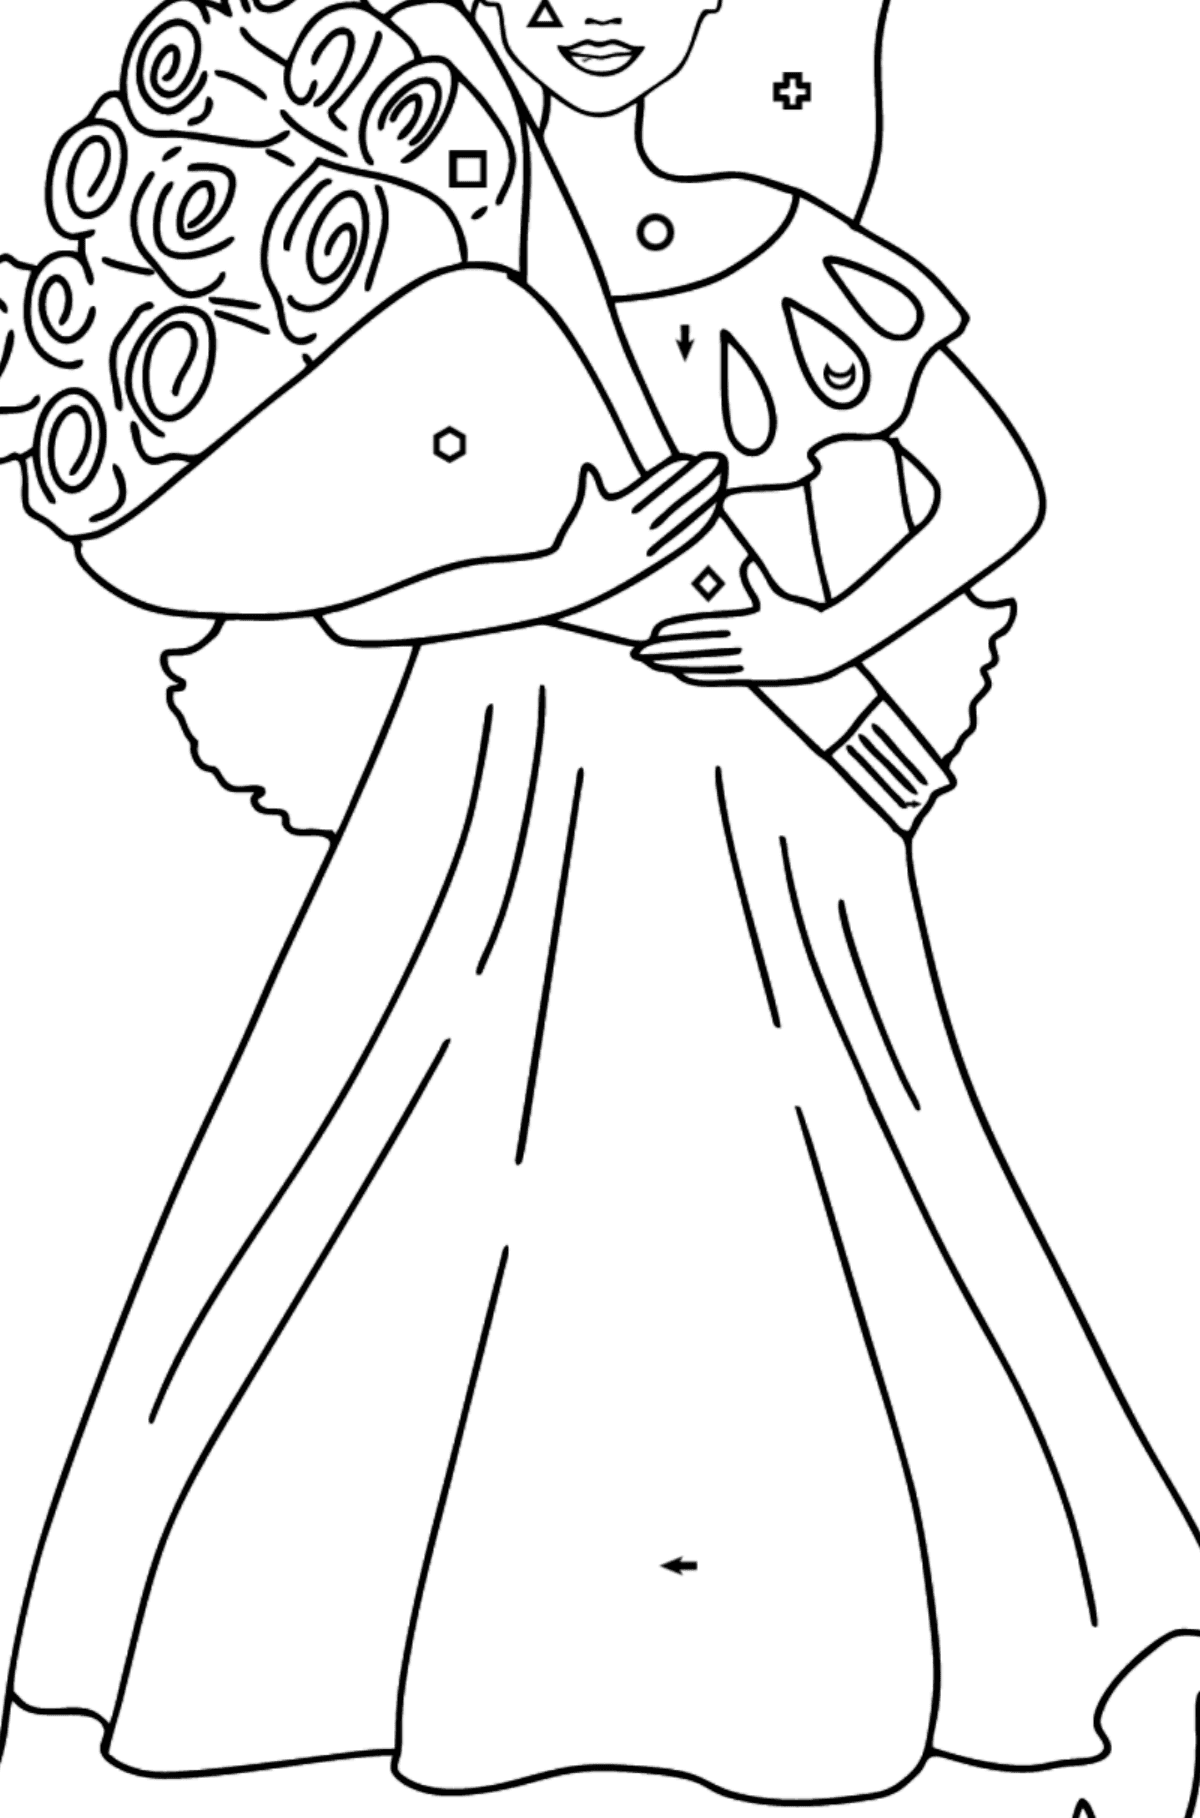 Barbie Doll and a Bouquet of Roses coloring page - Coloring by Symbols and Geometric Shapes for Kids